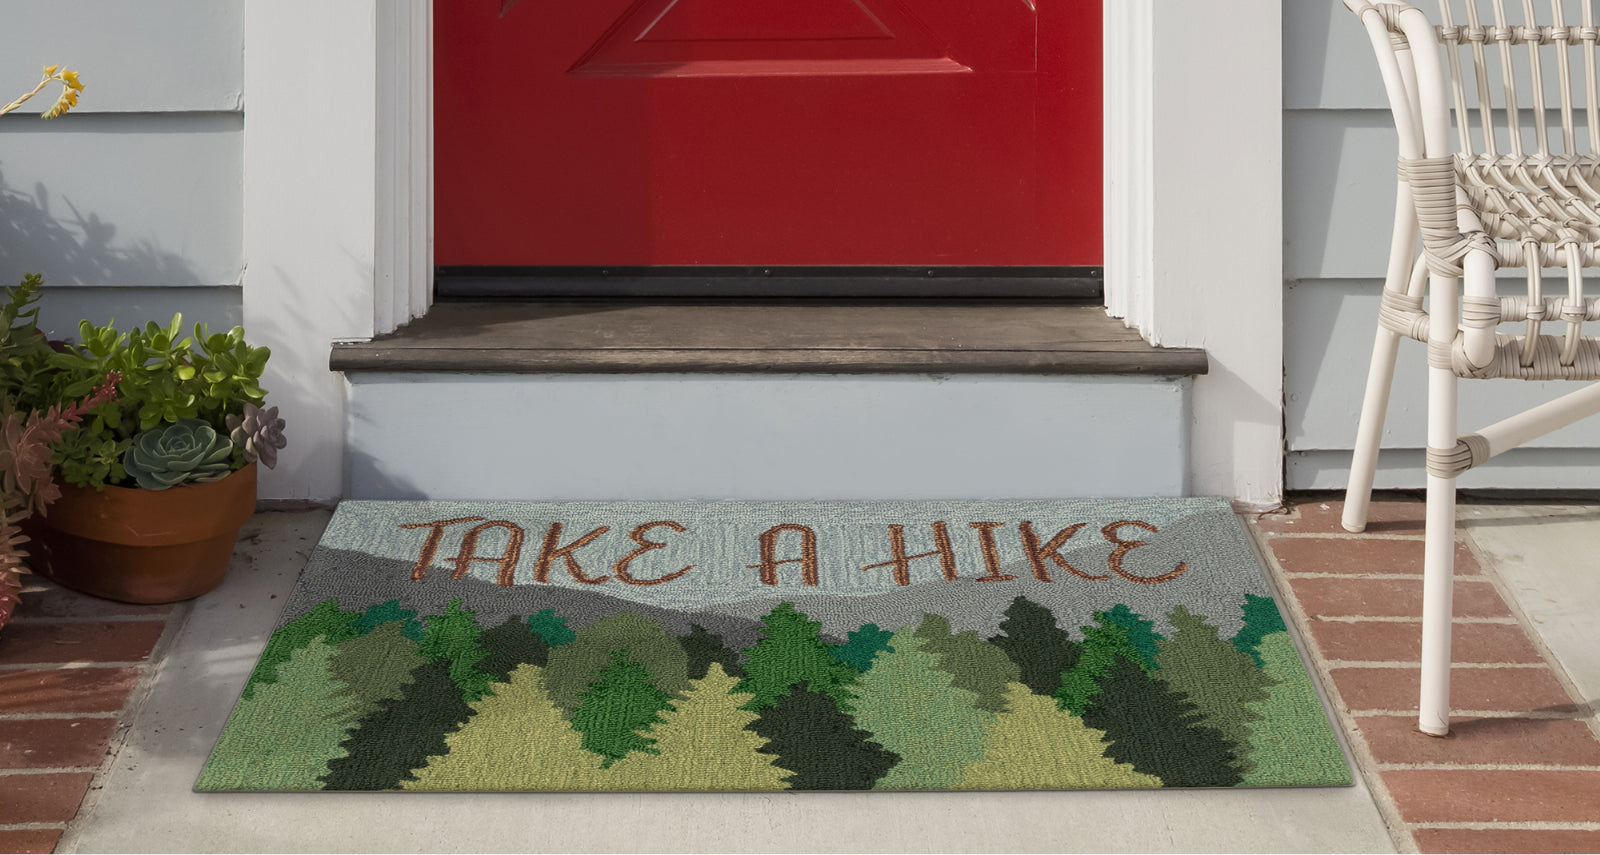 Trans Ocean Frontporch 4513/16 Take A Hike Green Area Rug by Liora Manne